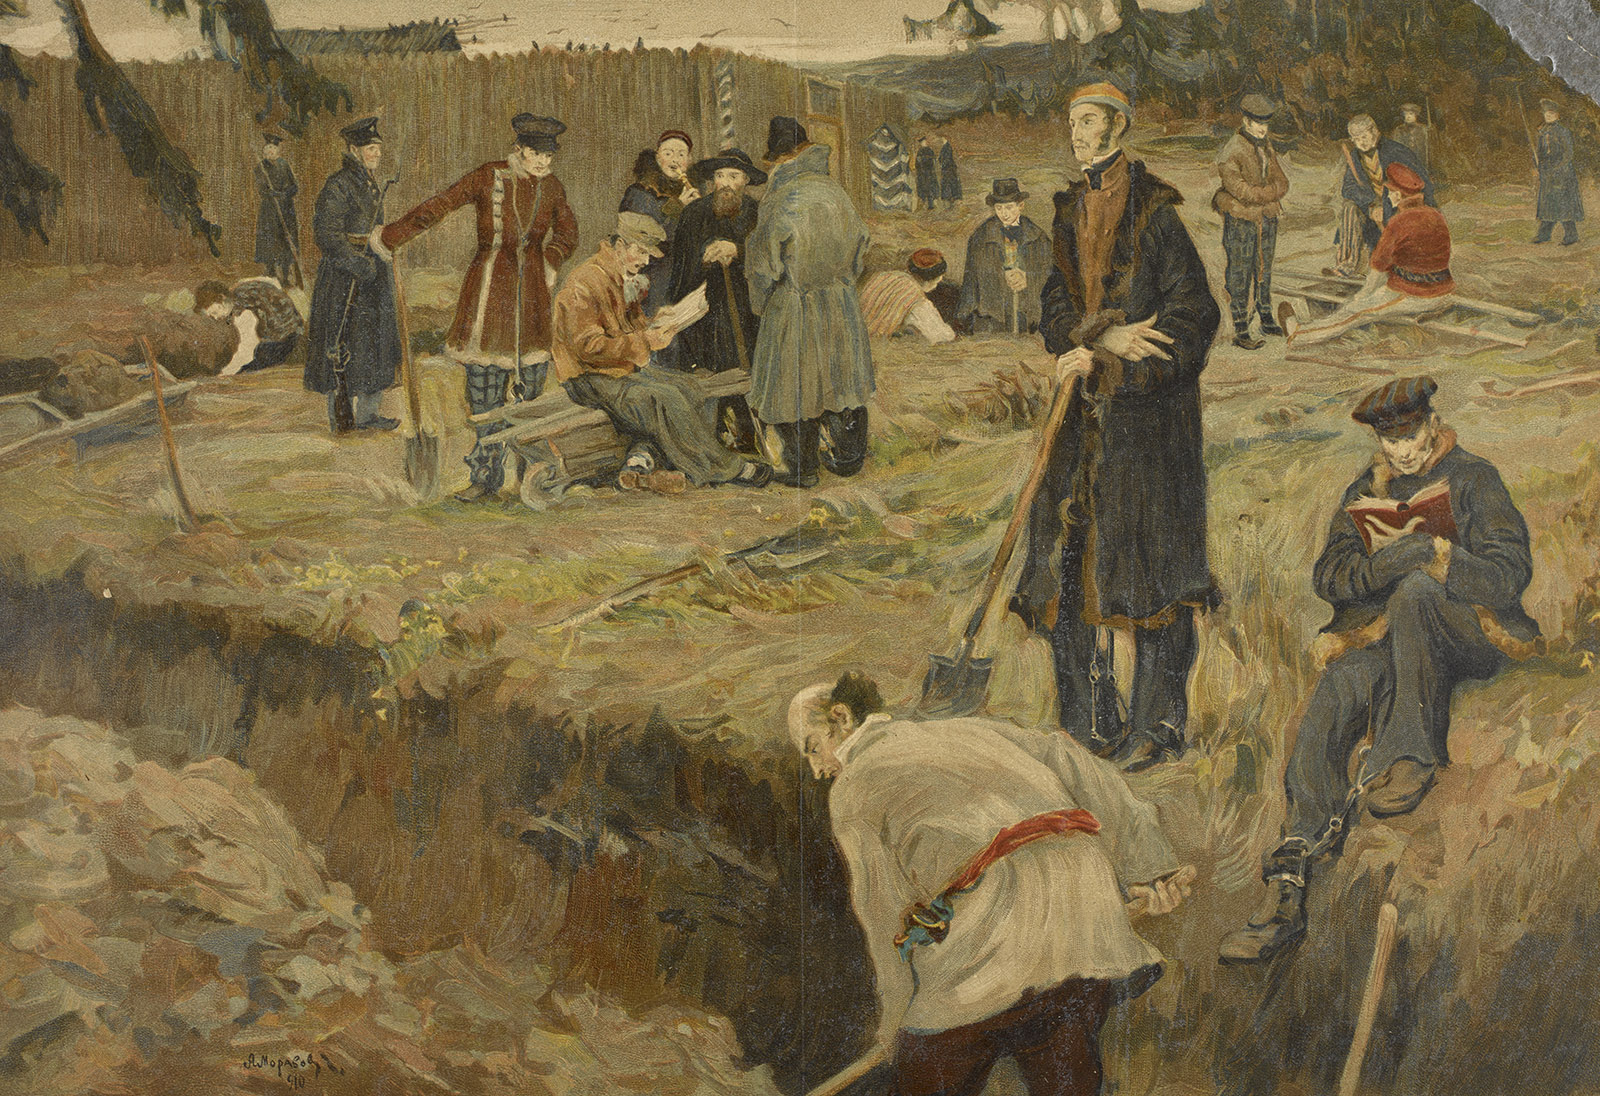 Decembrists in a Siberian prison camp, reproduction of a painting by A.V. Morovov, 1910